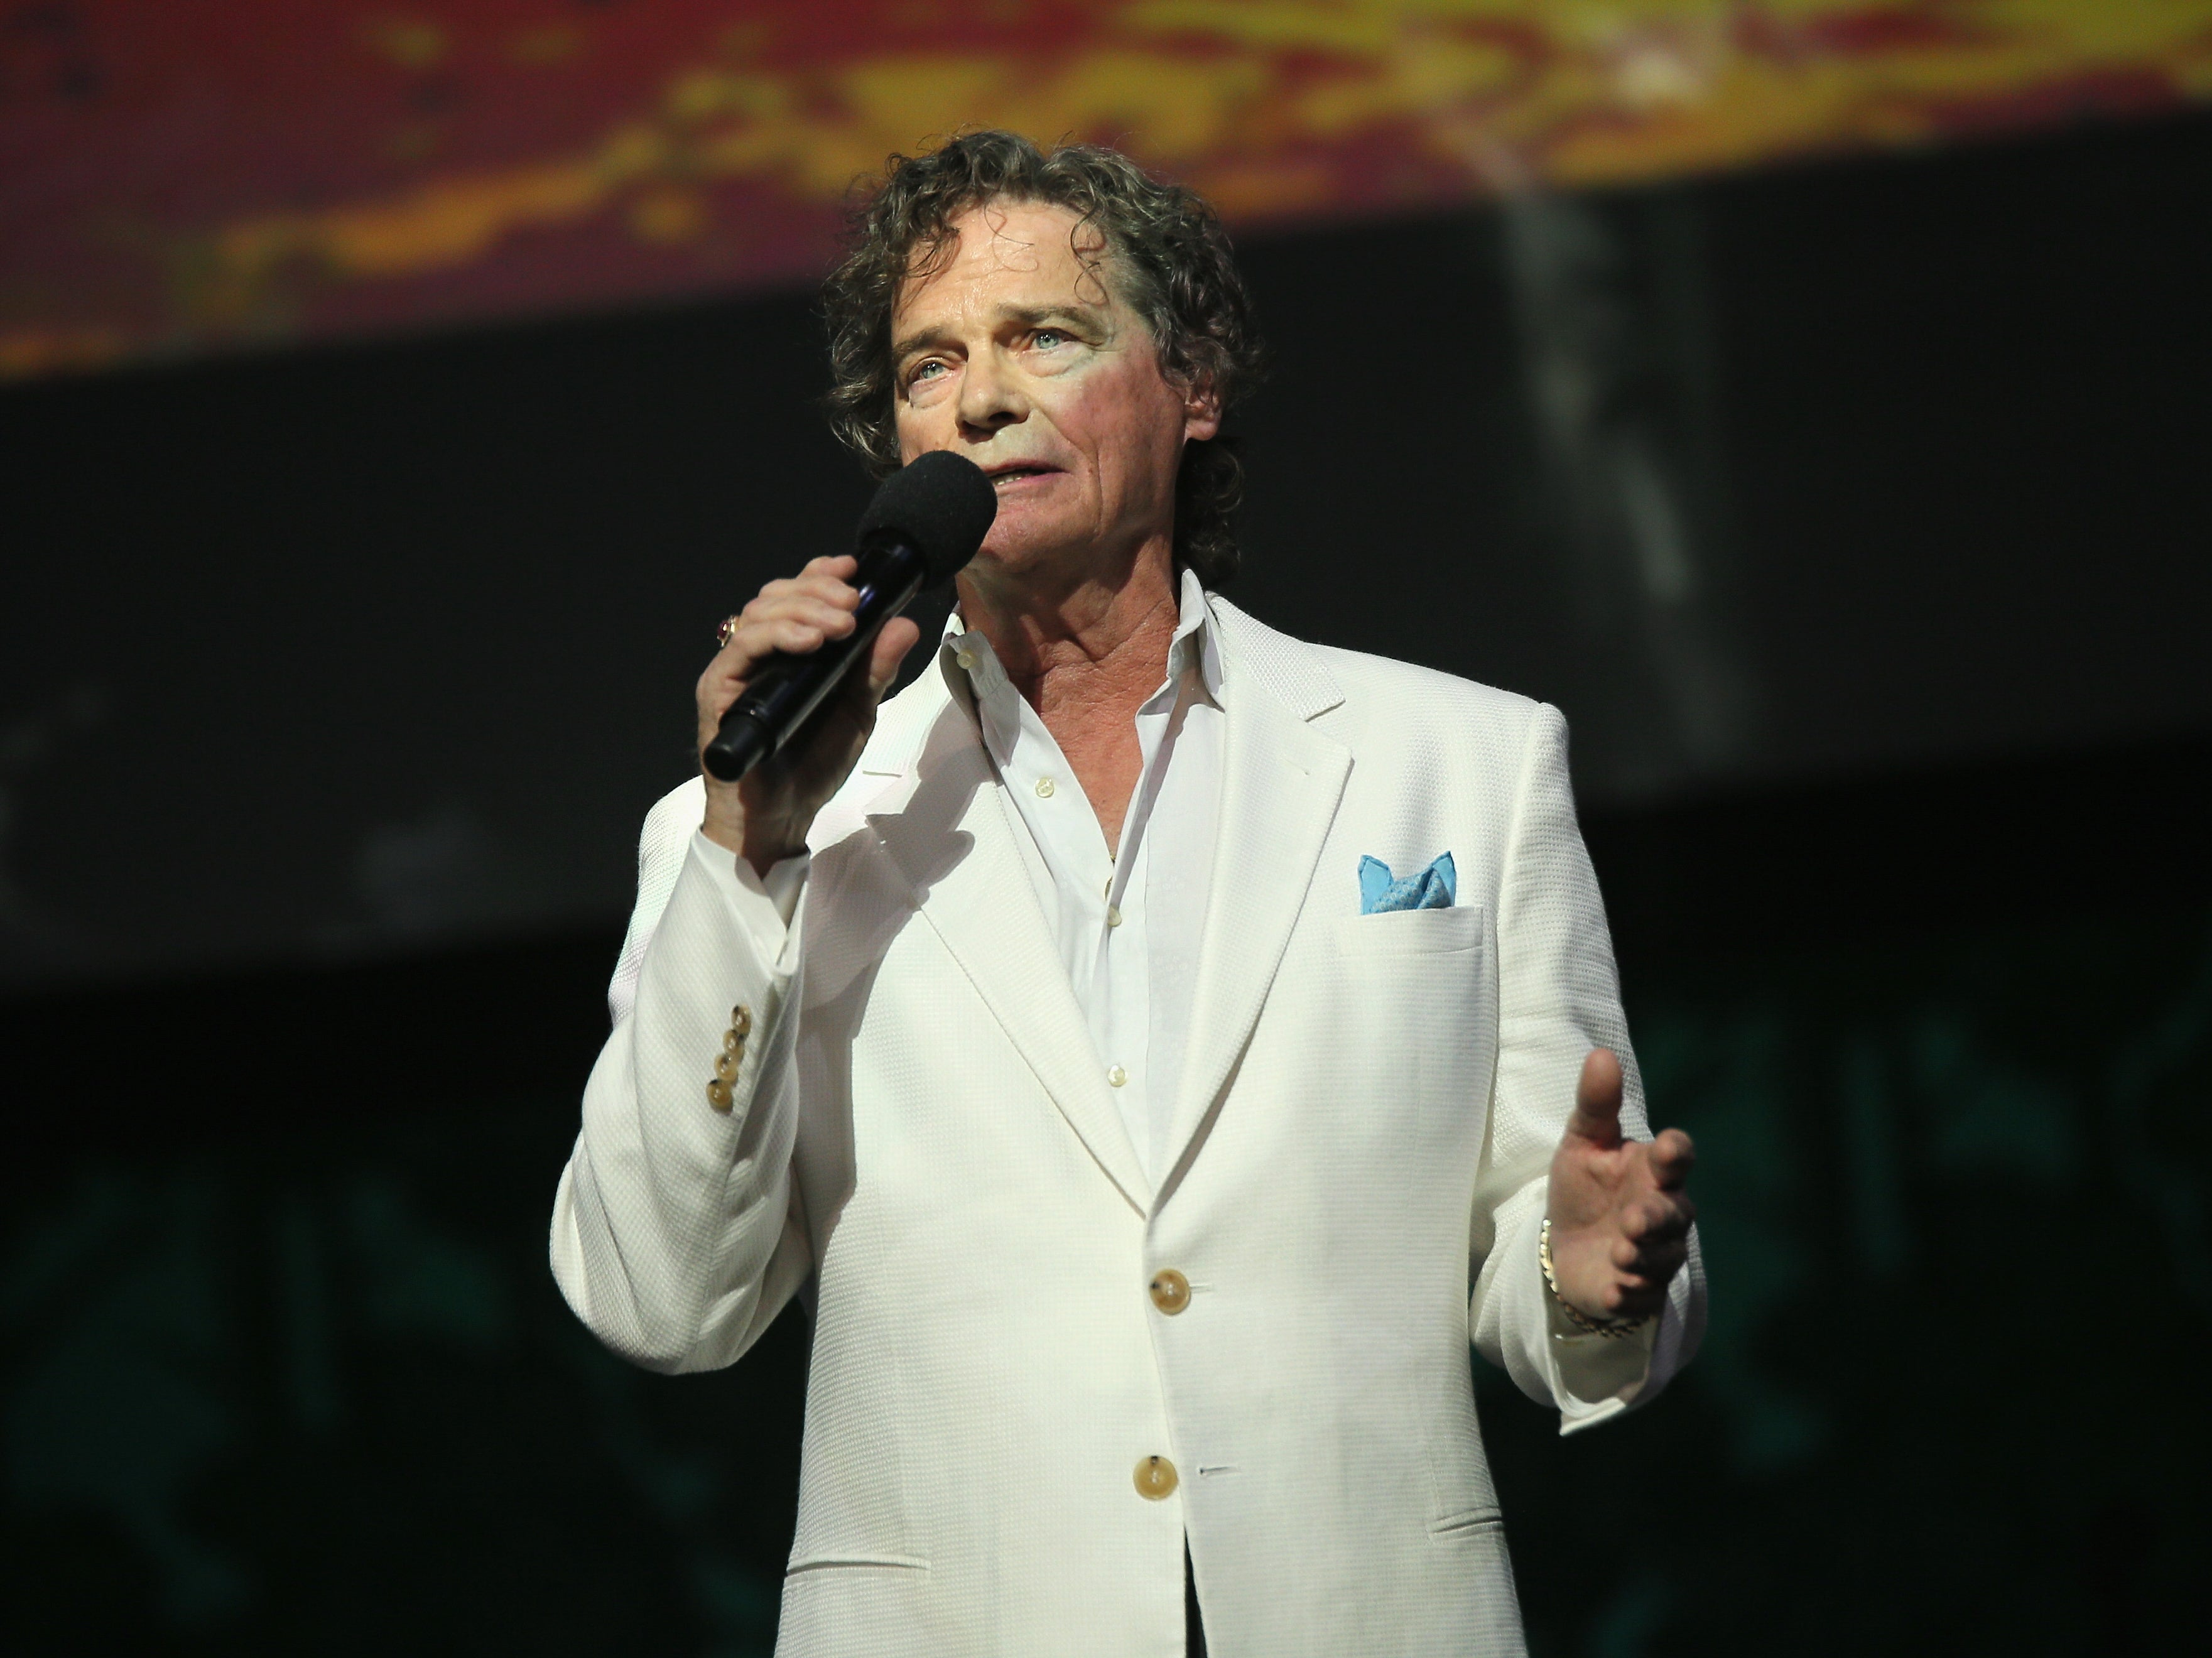 Thomas on stage in 2015